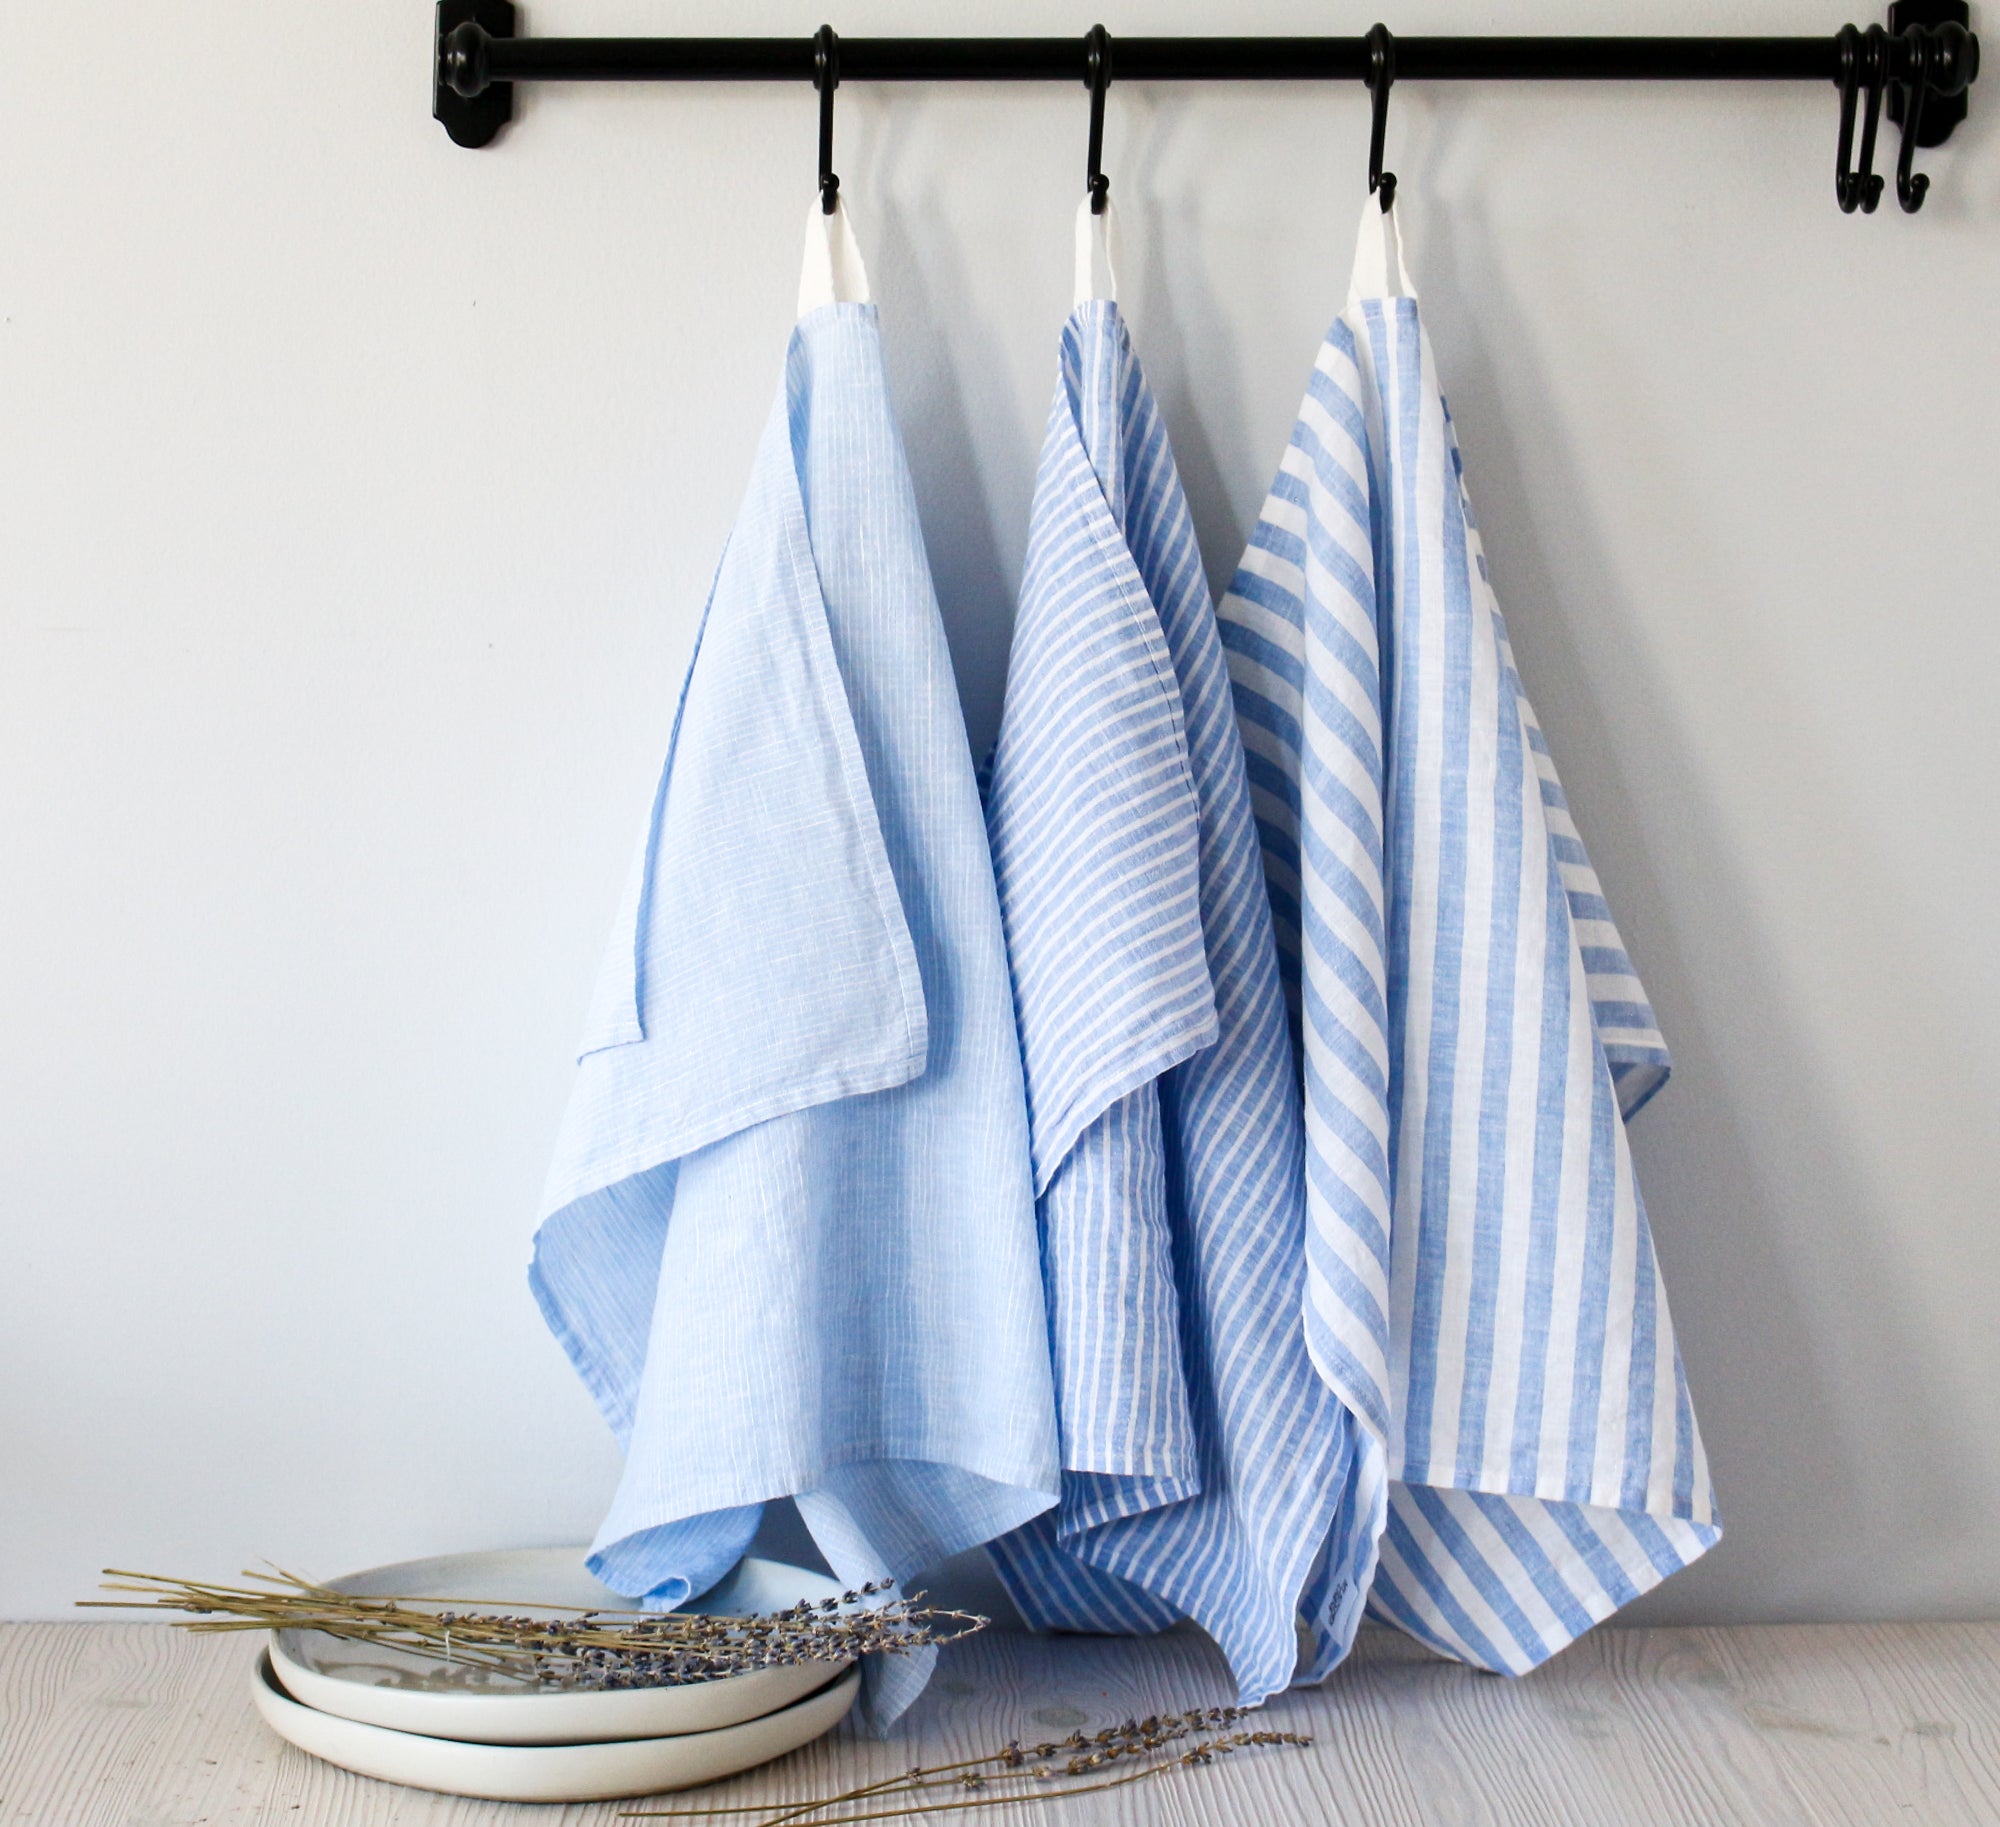 Bathstyle / Cotton Dish Towels, Kitchen Towels, Tea Towels, Striped Towels,  Small Guest Towels, Absorbent Tea Towels, Kitchen Drying Towel 